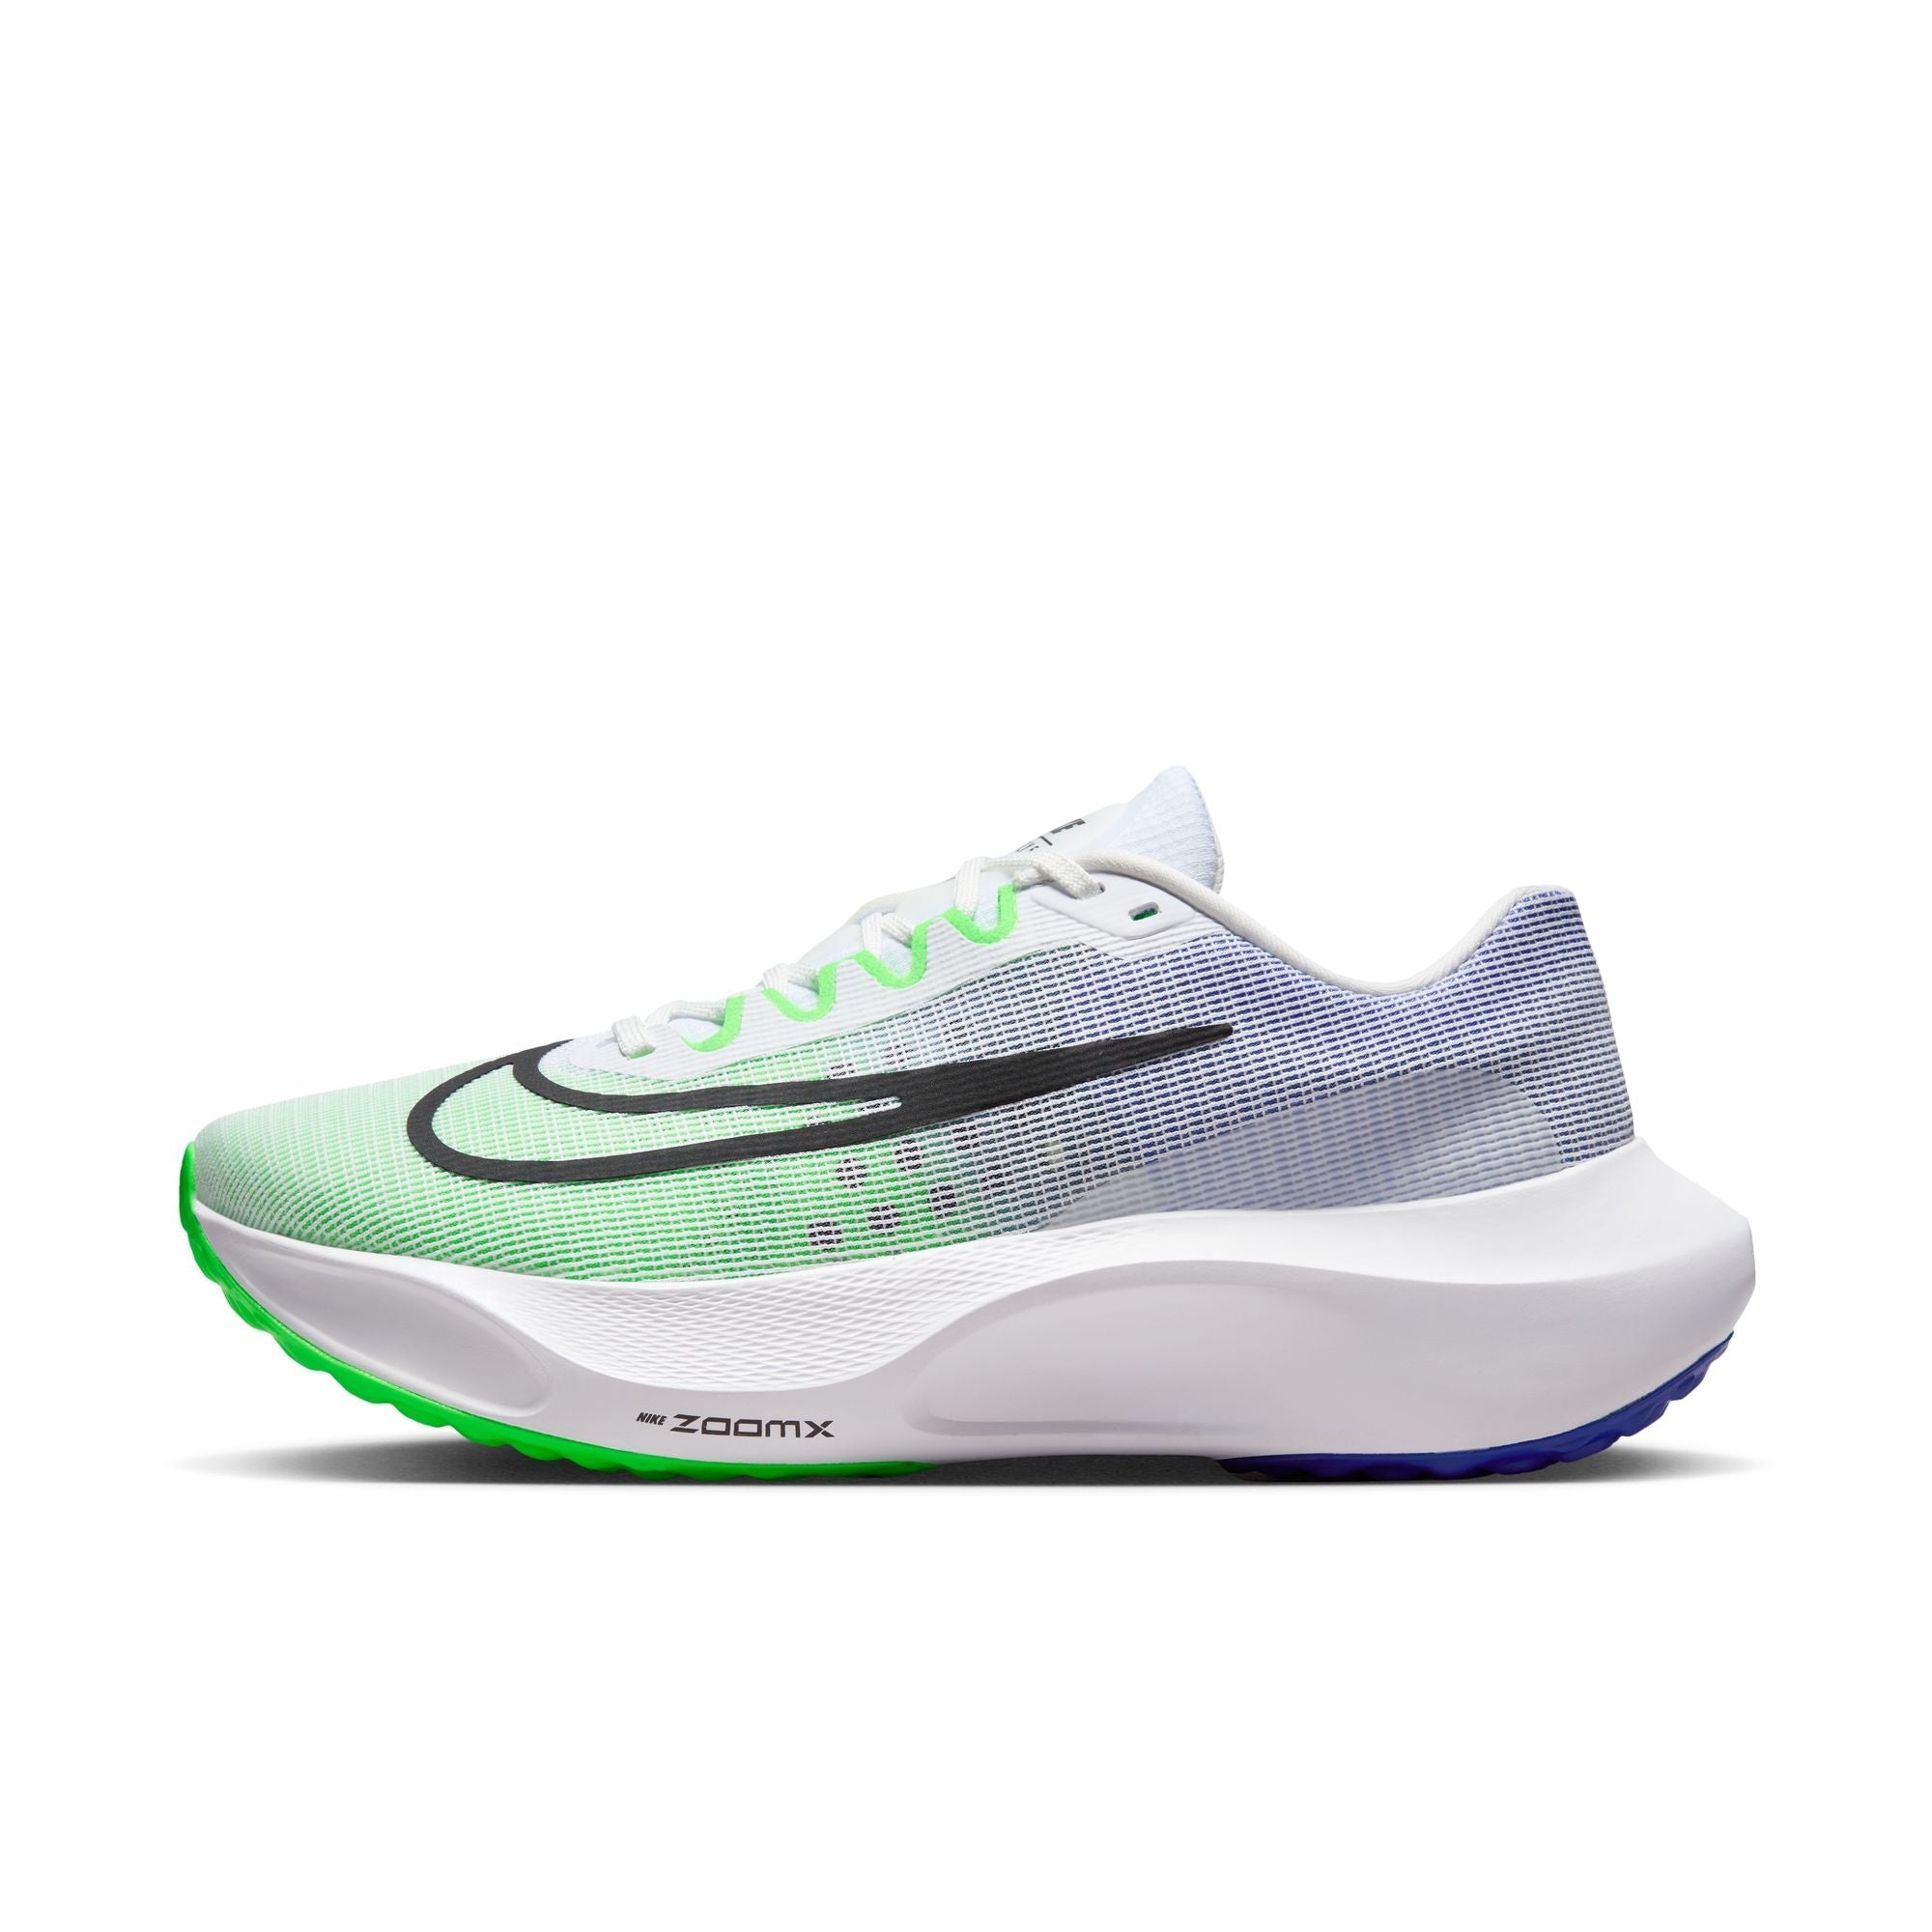 NIKE ZOOM FLY 5 DM8968-101 RUNNING SHOES (M)